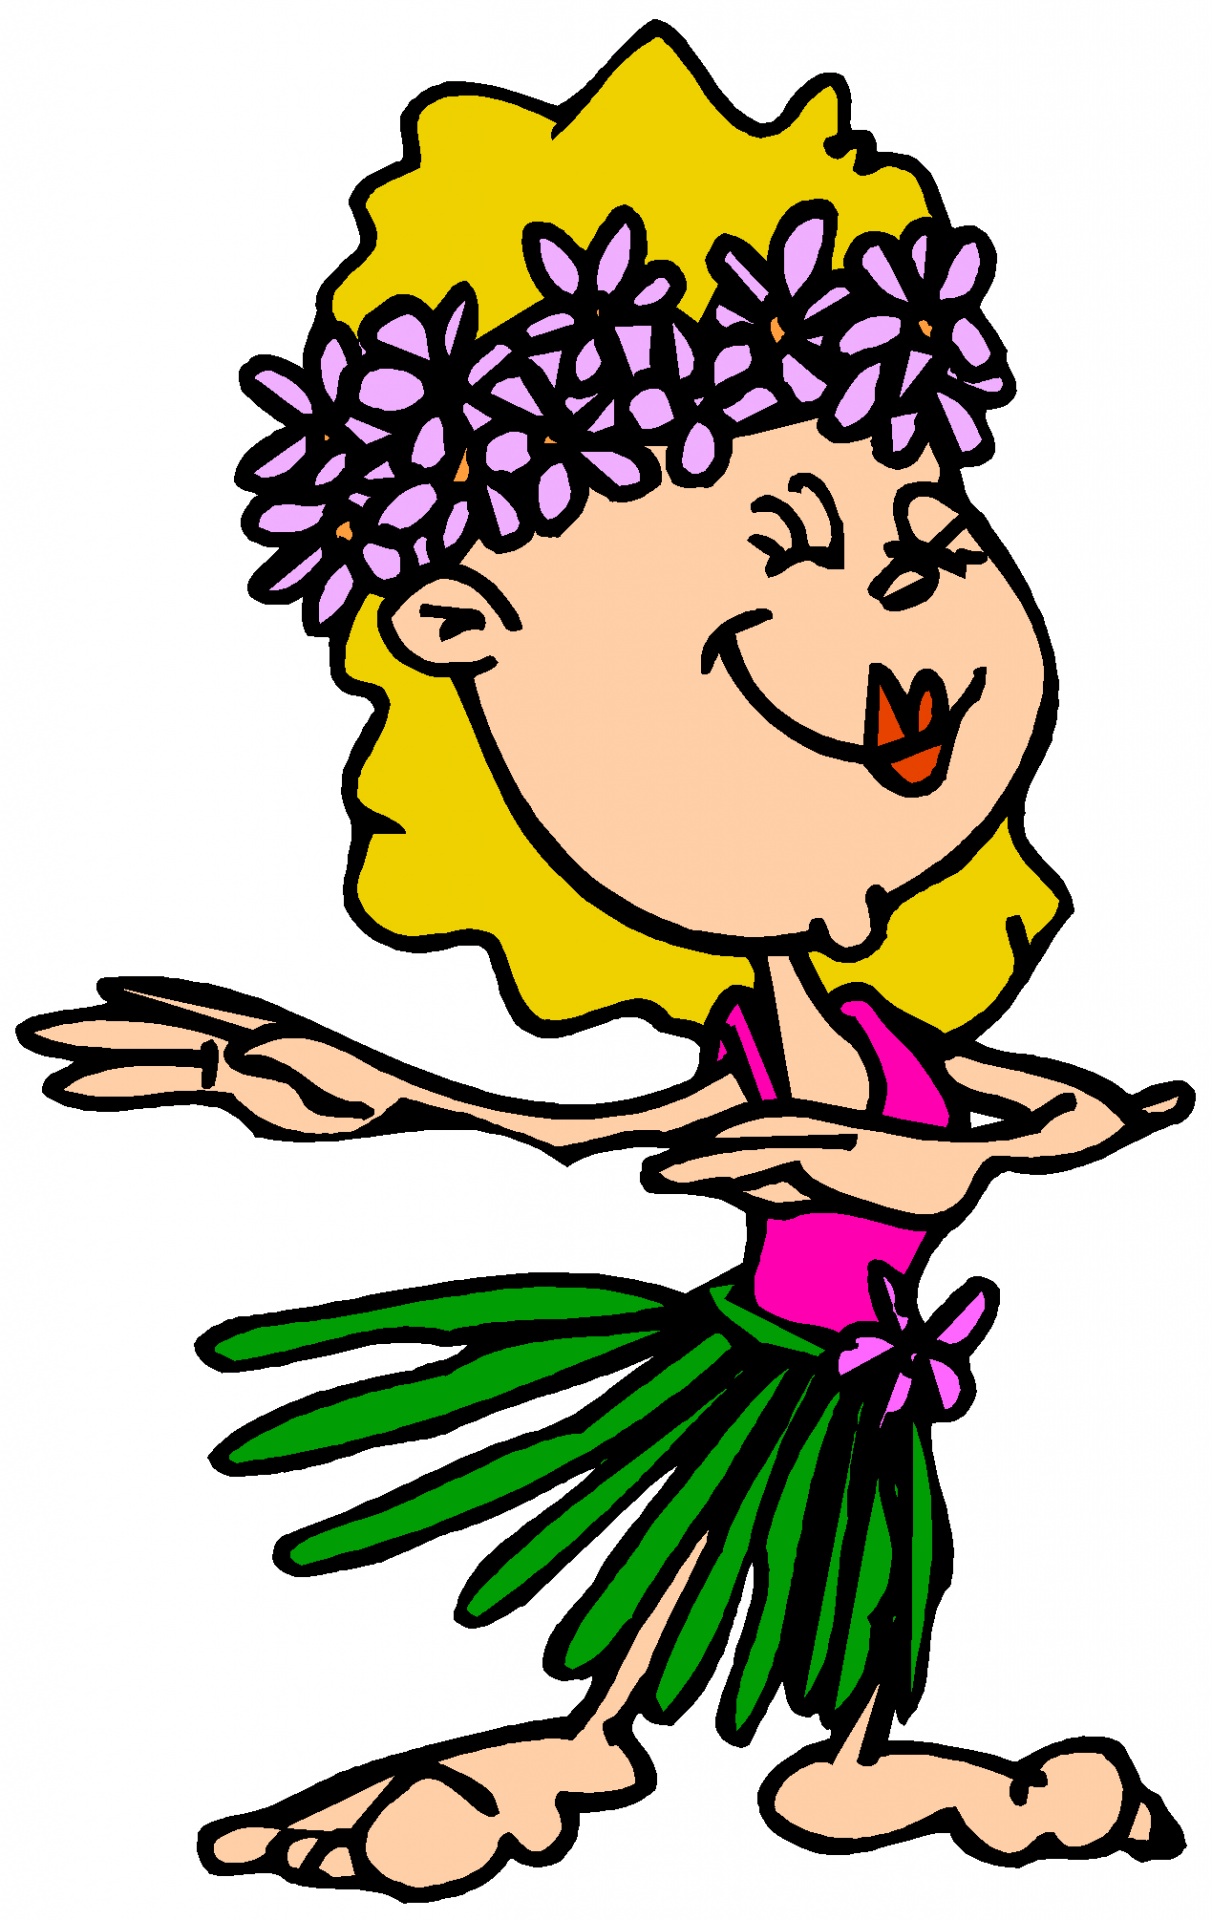 Fun,funny,drawing,clipart,laugh - free image from needpix.com.